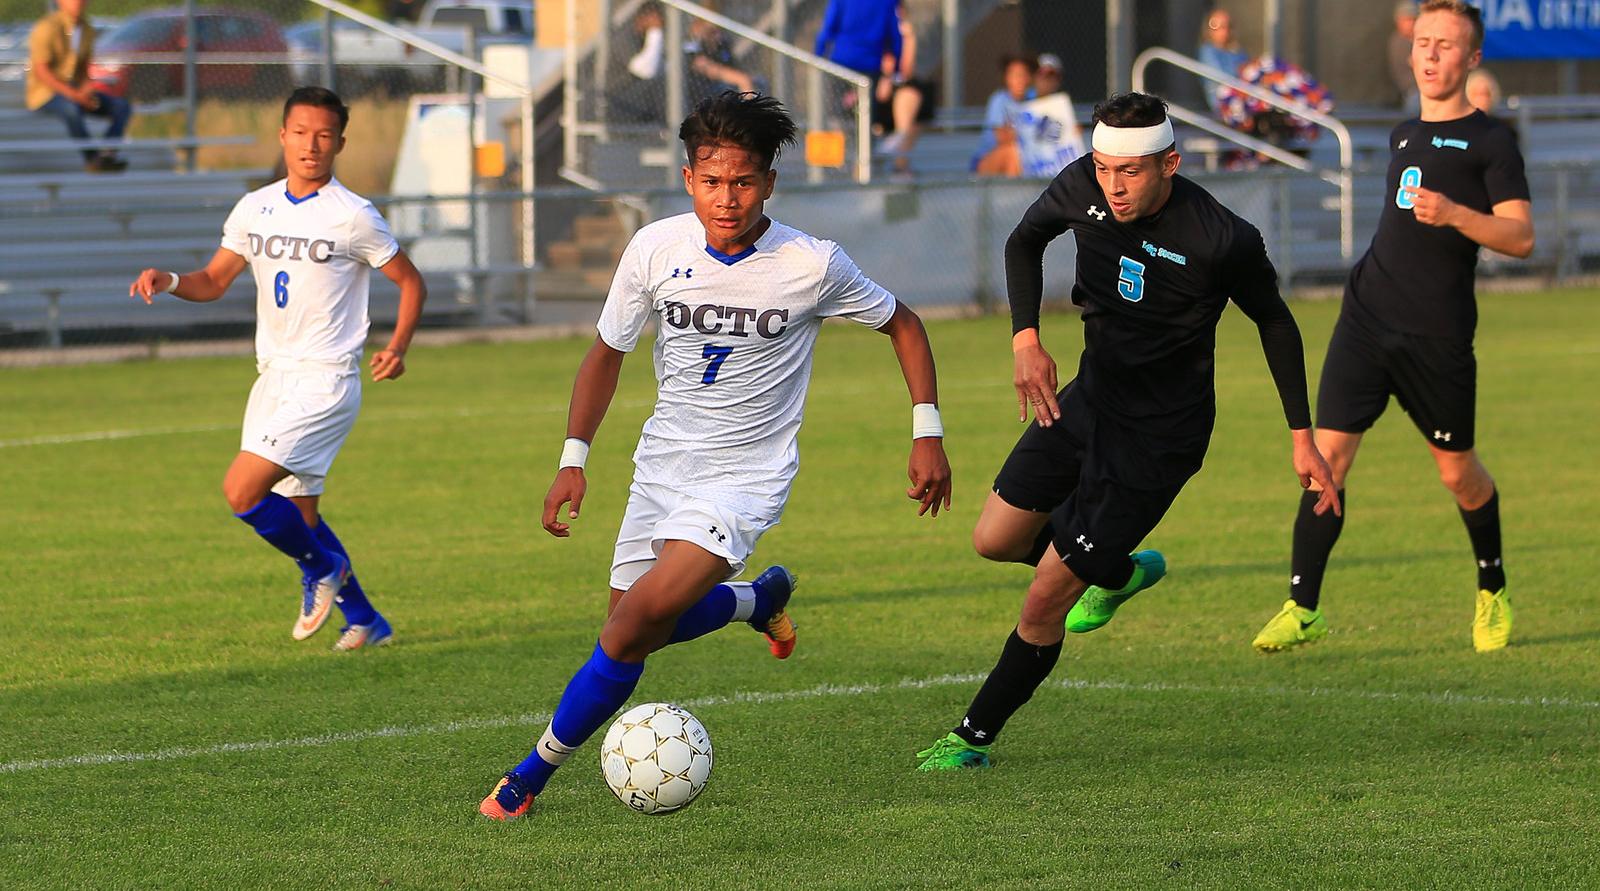 DCTC Men’s Soccer opens season with 2-2 record